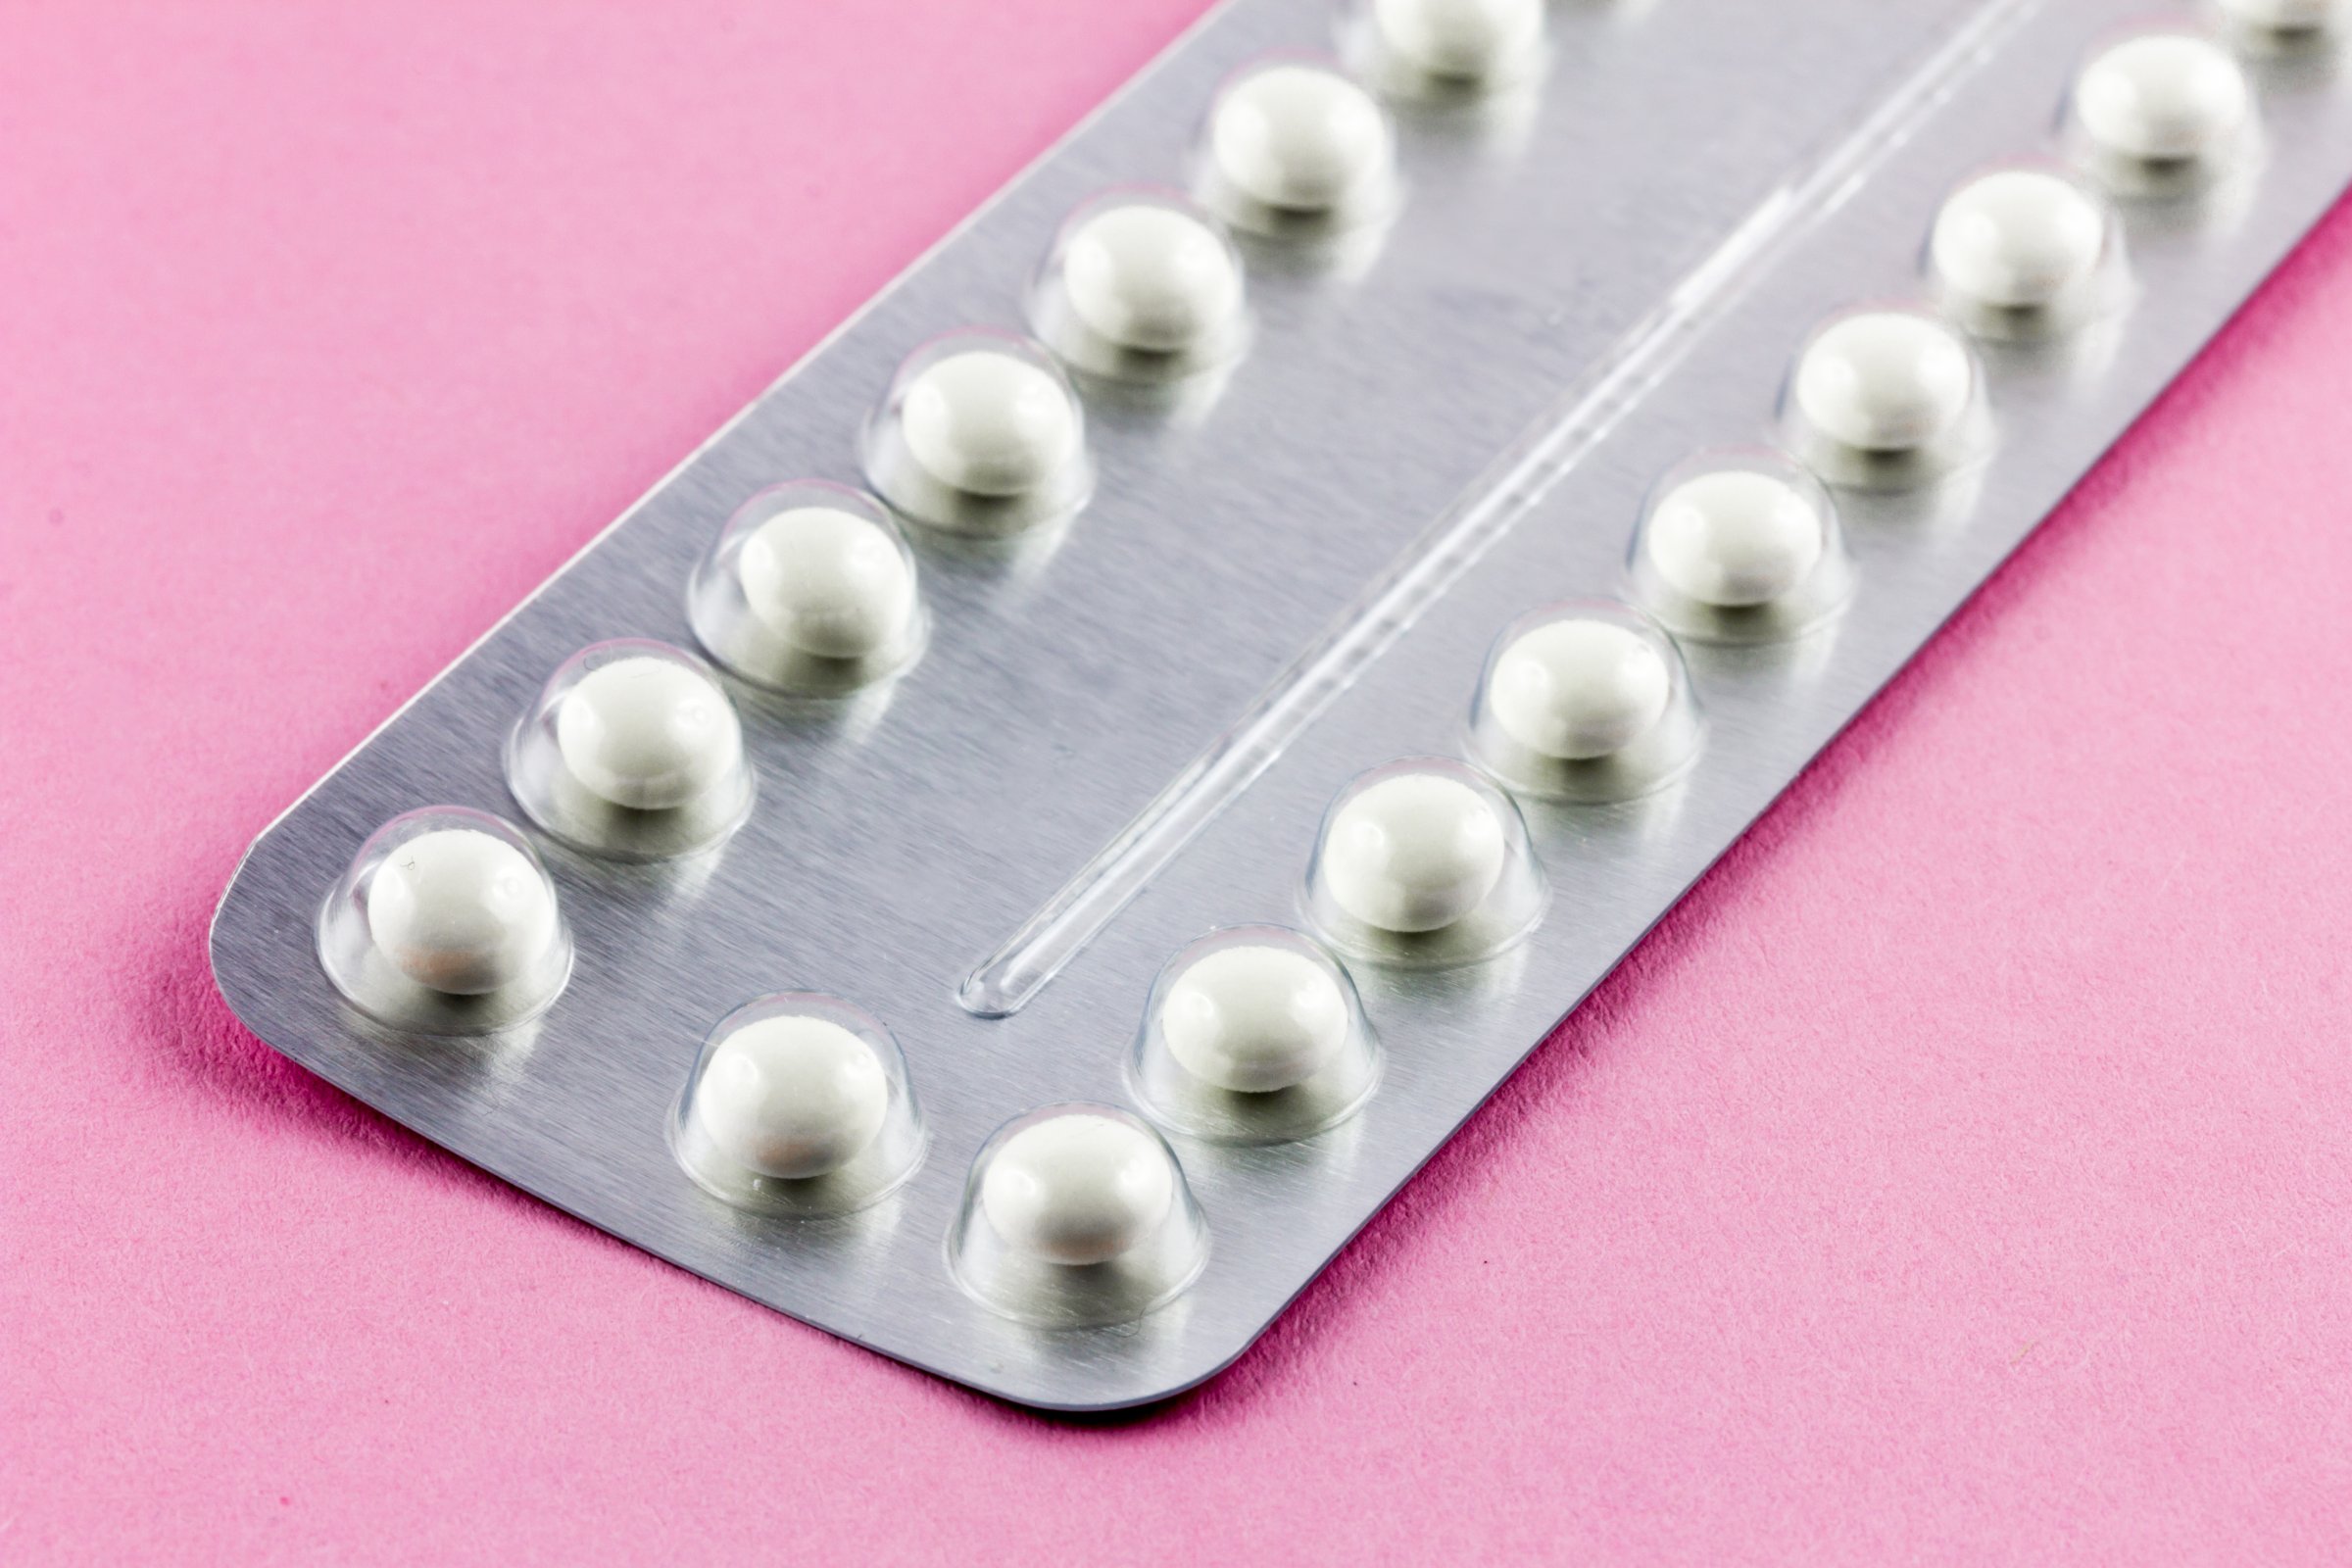 Birth control Pills on a pink background